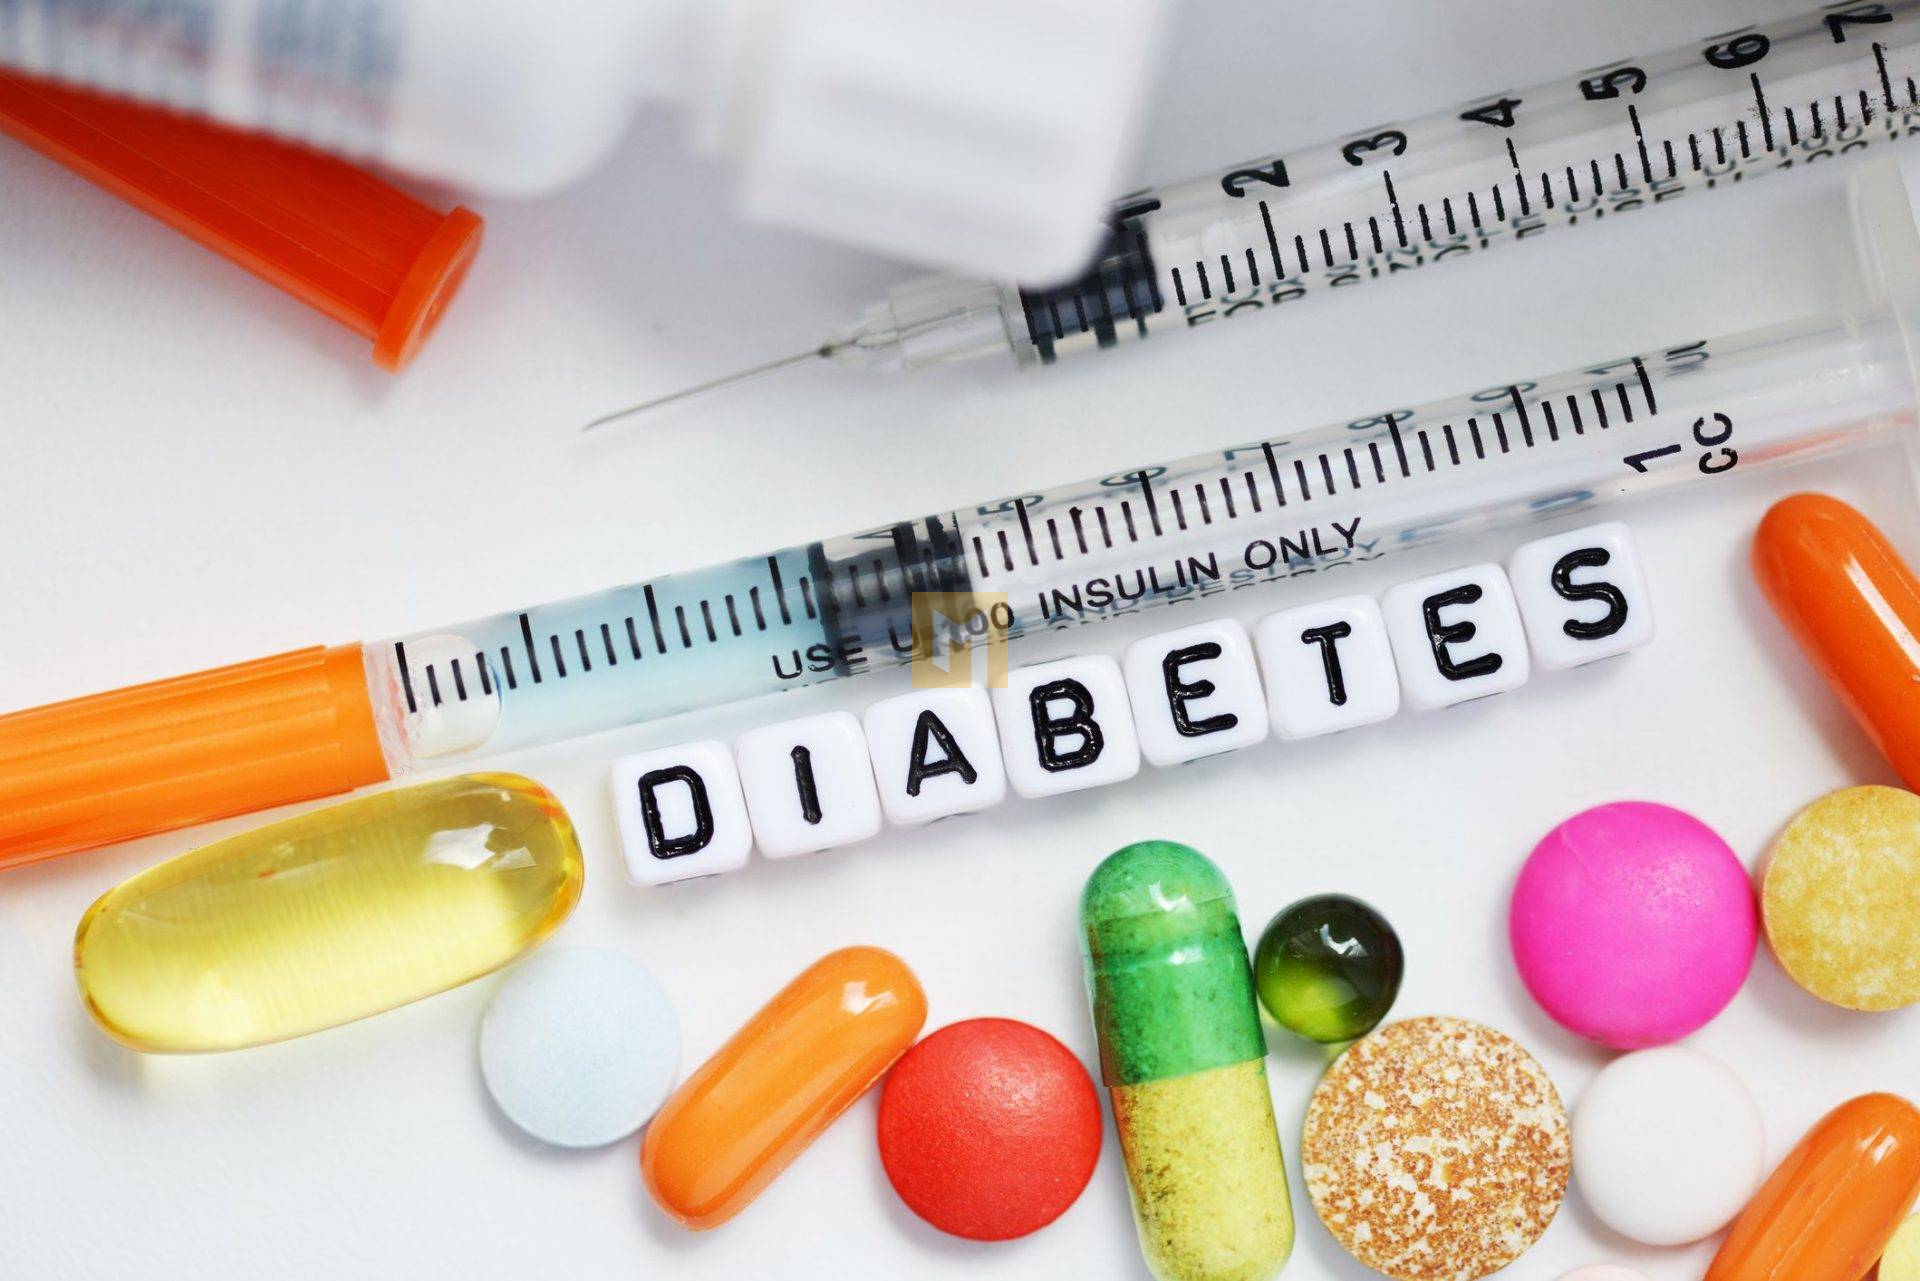 What medication is available for diabetes?